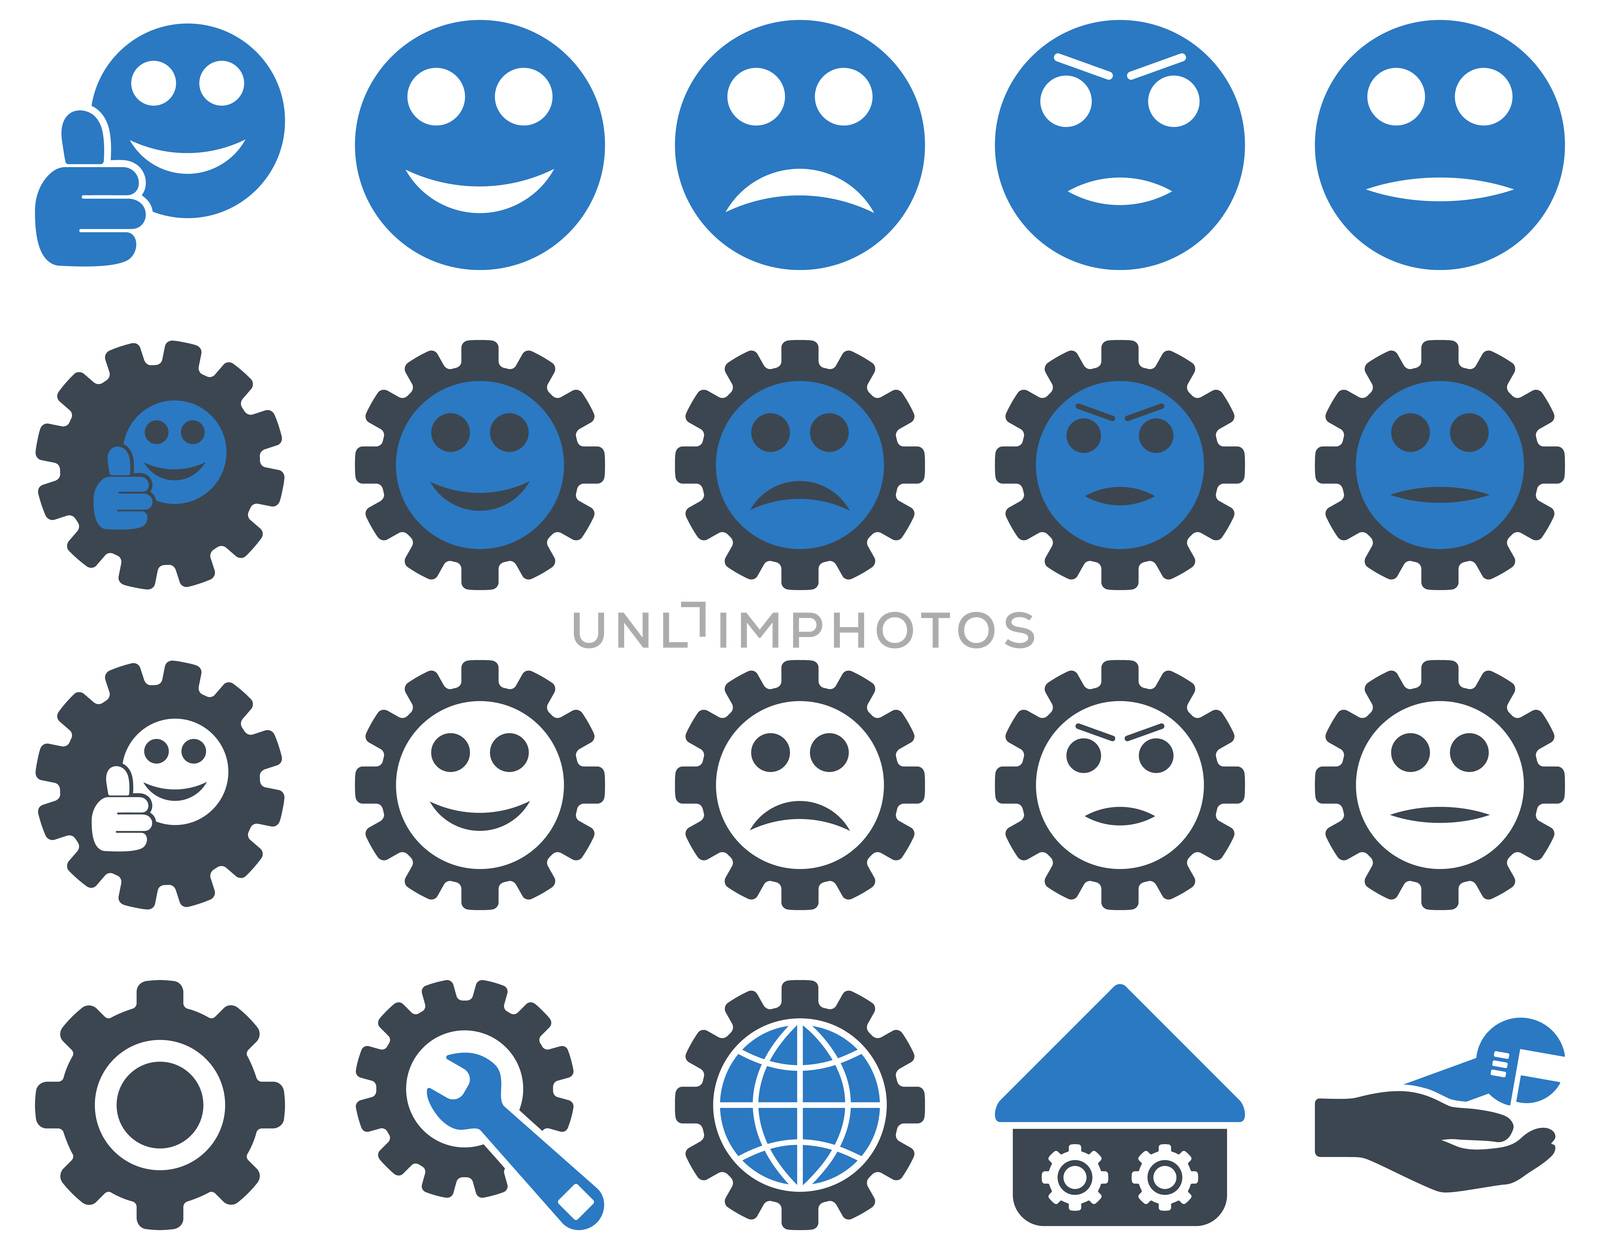 Settings and Smile Gears Icons. Icon set style is bicolor flat images, smooth blue colors, isolated on a white background.